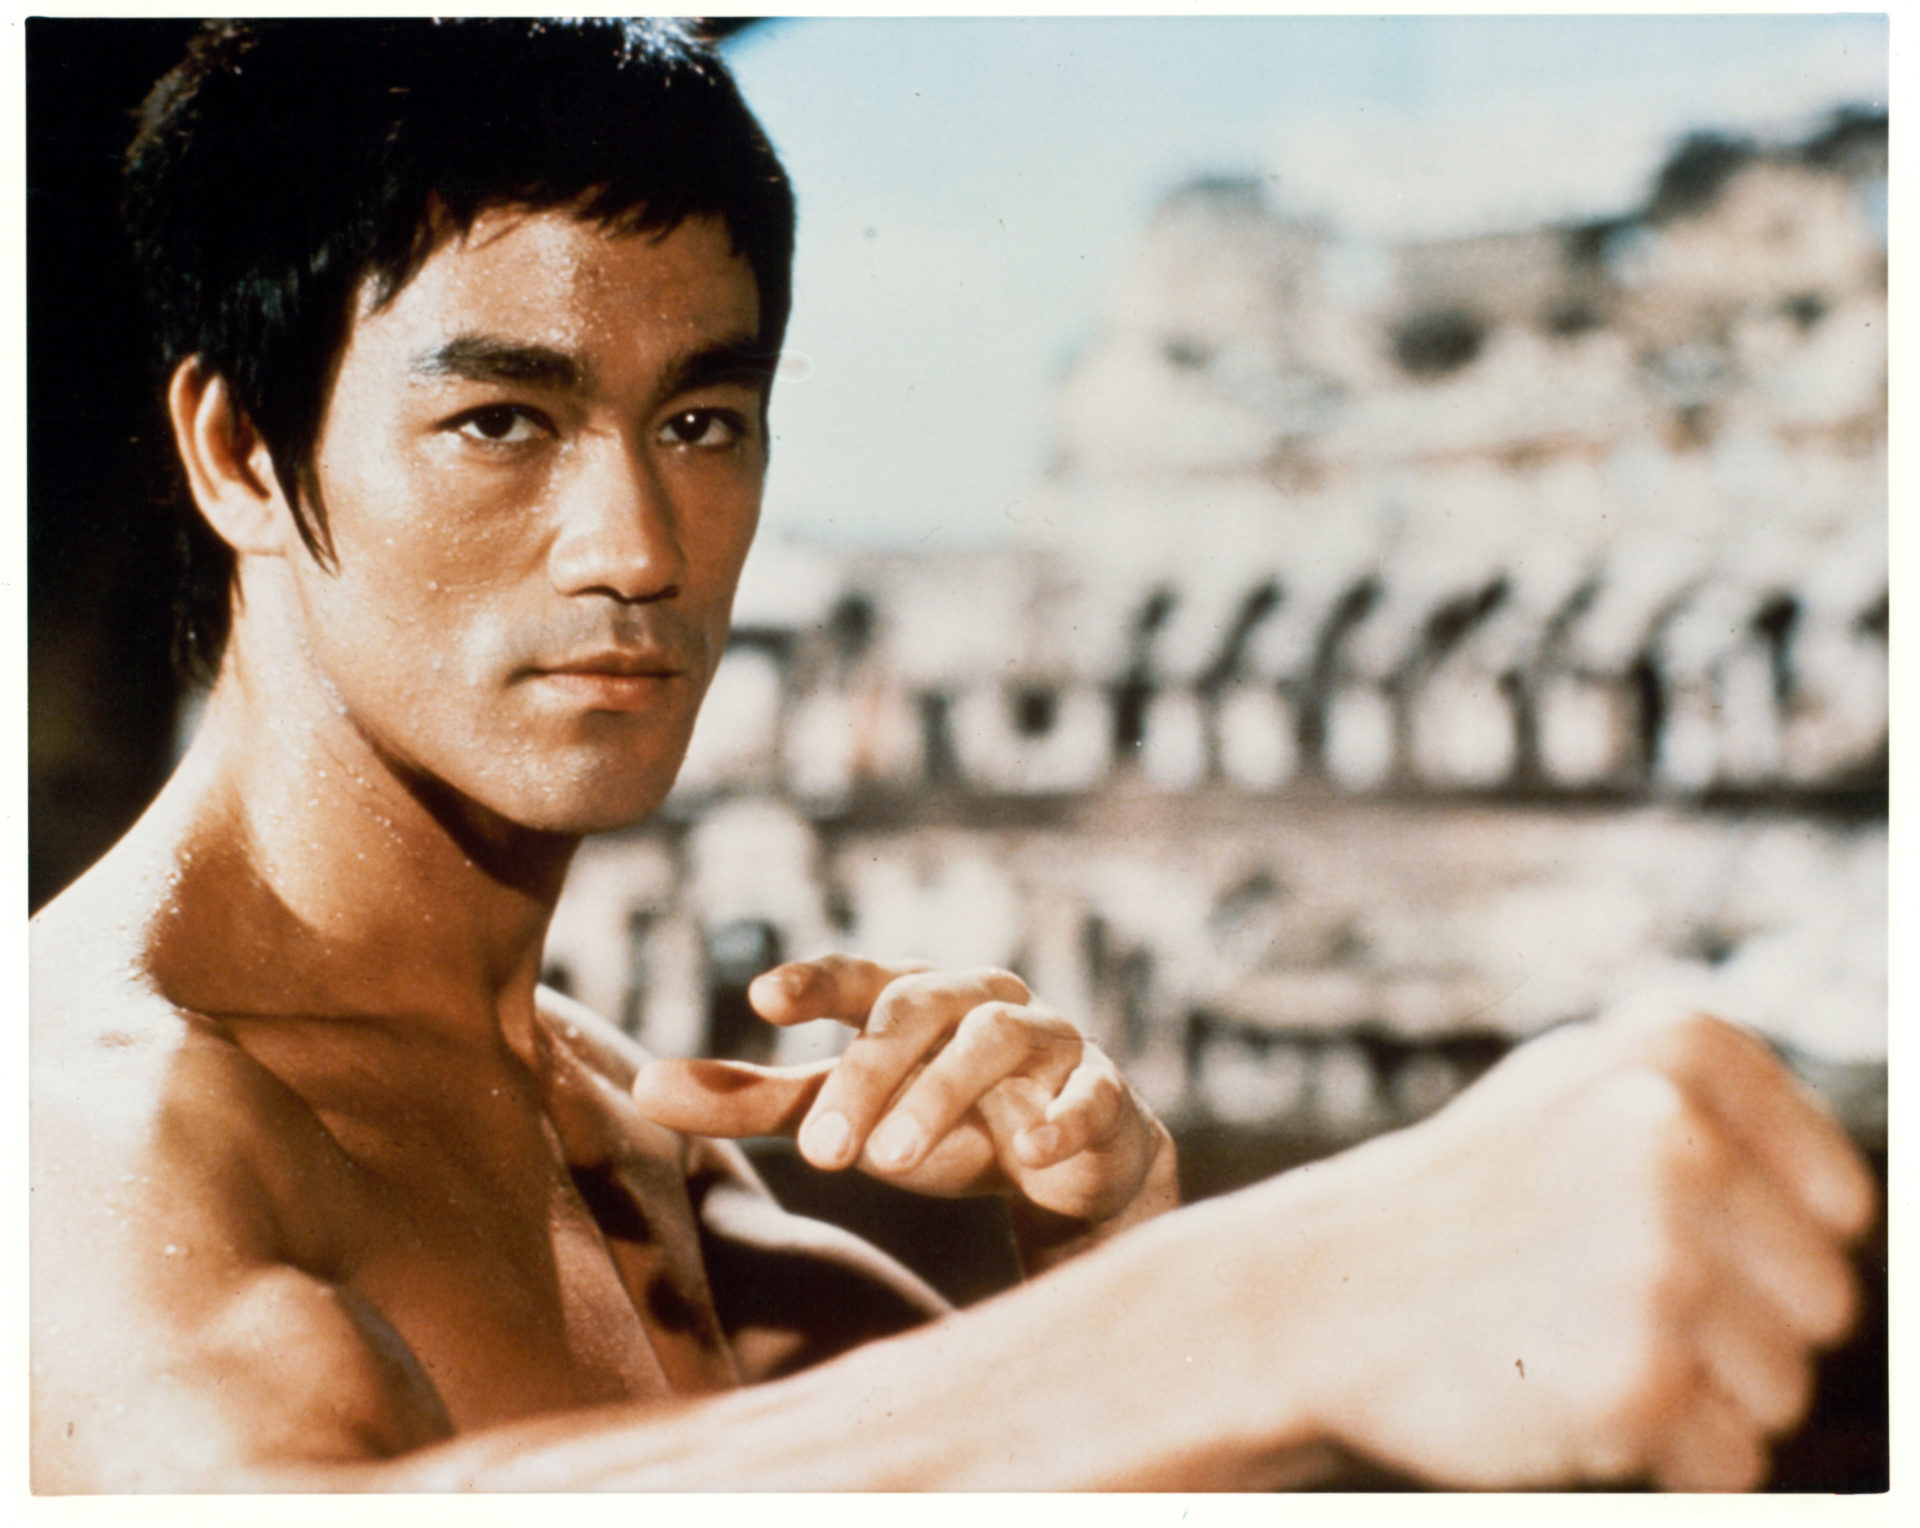 Bruce Lee In 'The Way Of The Dragon'